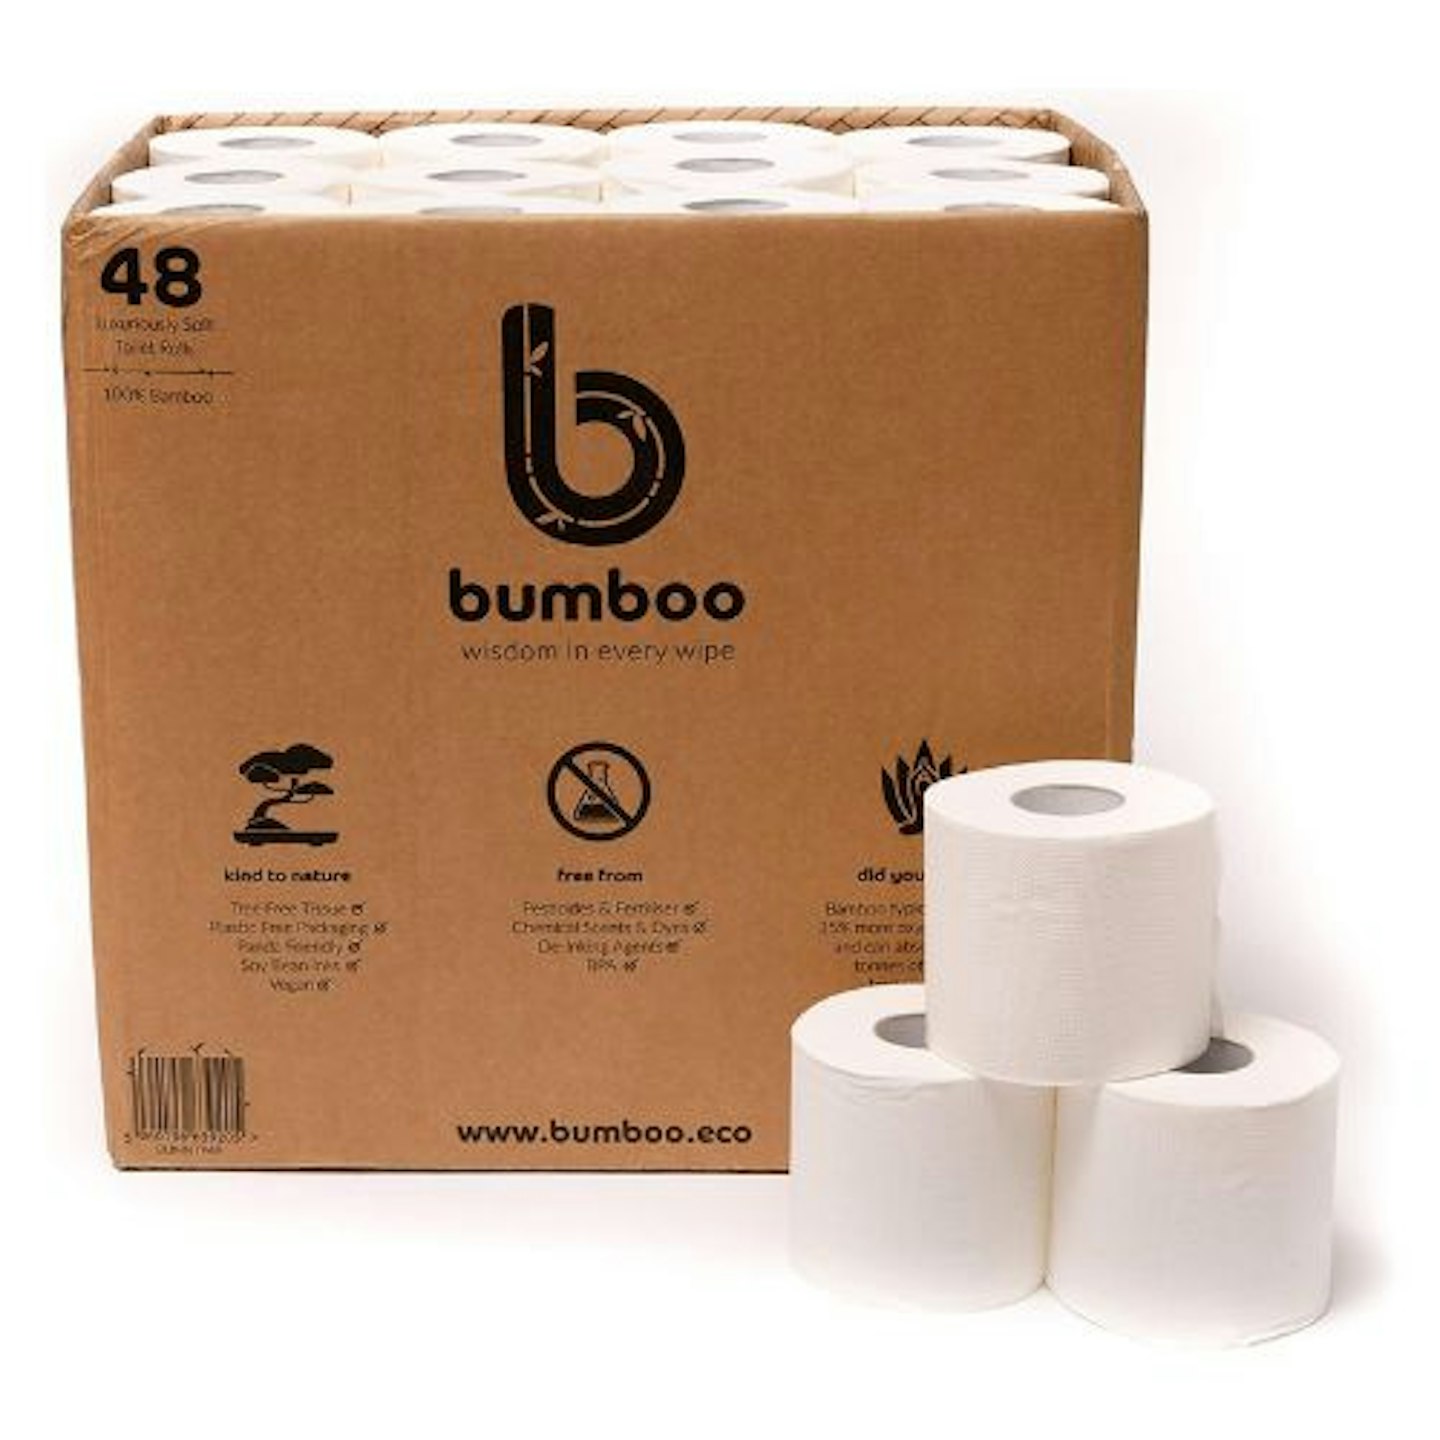  Bumboo Bamboo Toilet Roll 48 Pack | Toilet Paper 3 ply, 300 Sheets | Bulk Toilet Rolls | Plastic-Free, Soft, Strong, Sustainable & Biodegradable Loo Roll